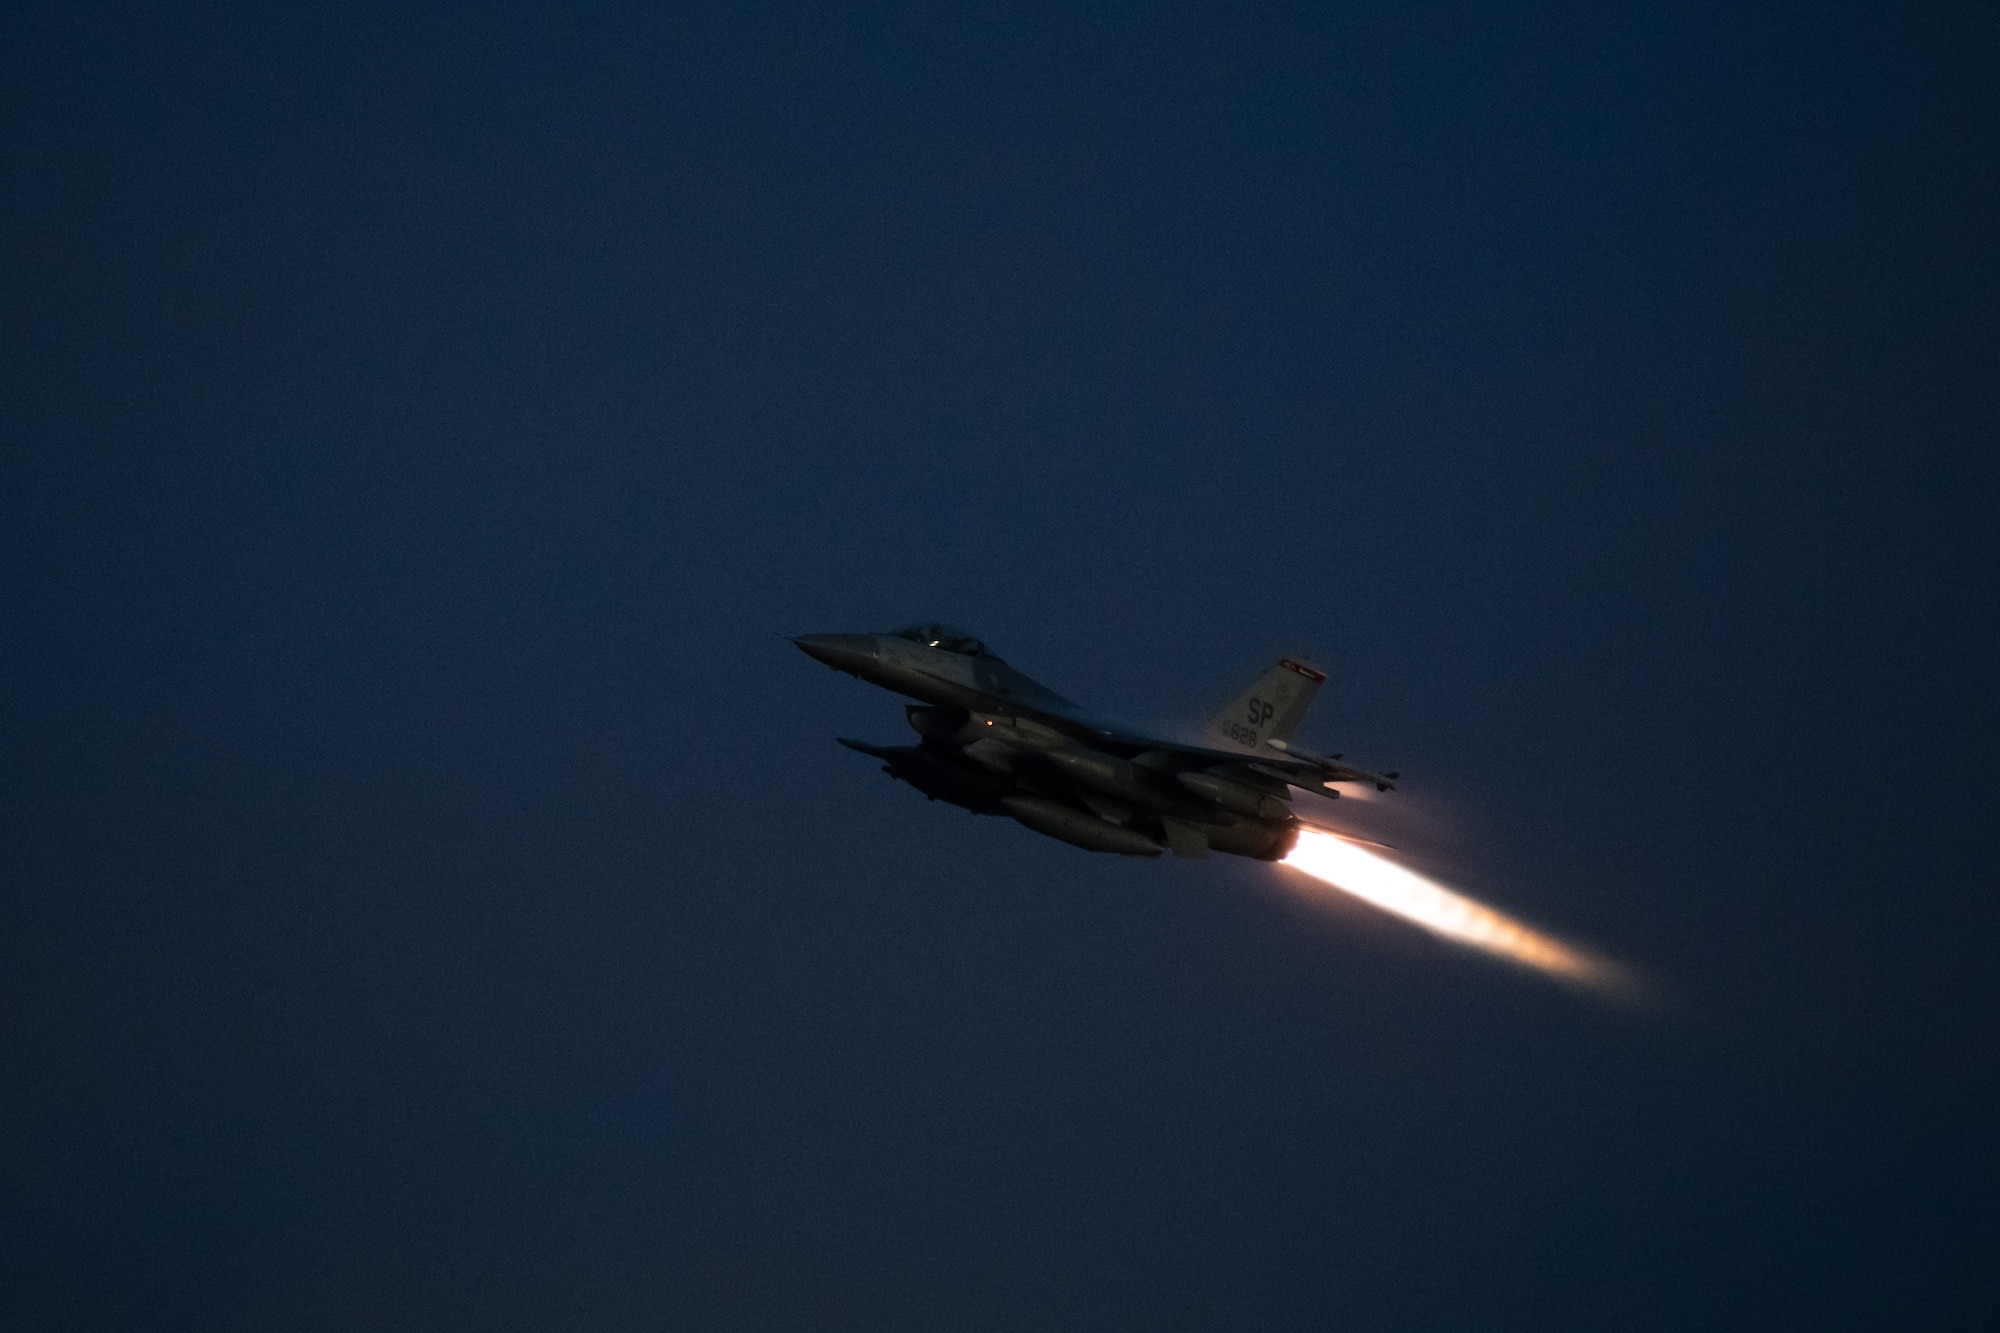 An F-16 flies across the night sky with its afterburner engaged.